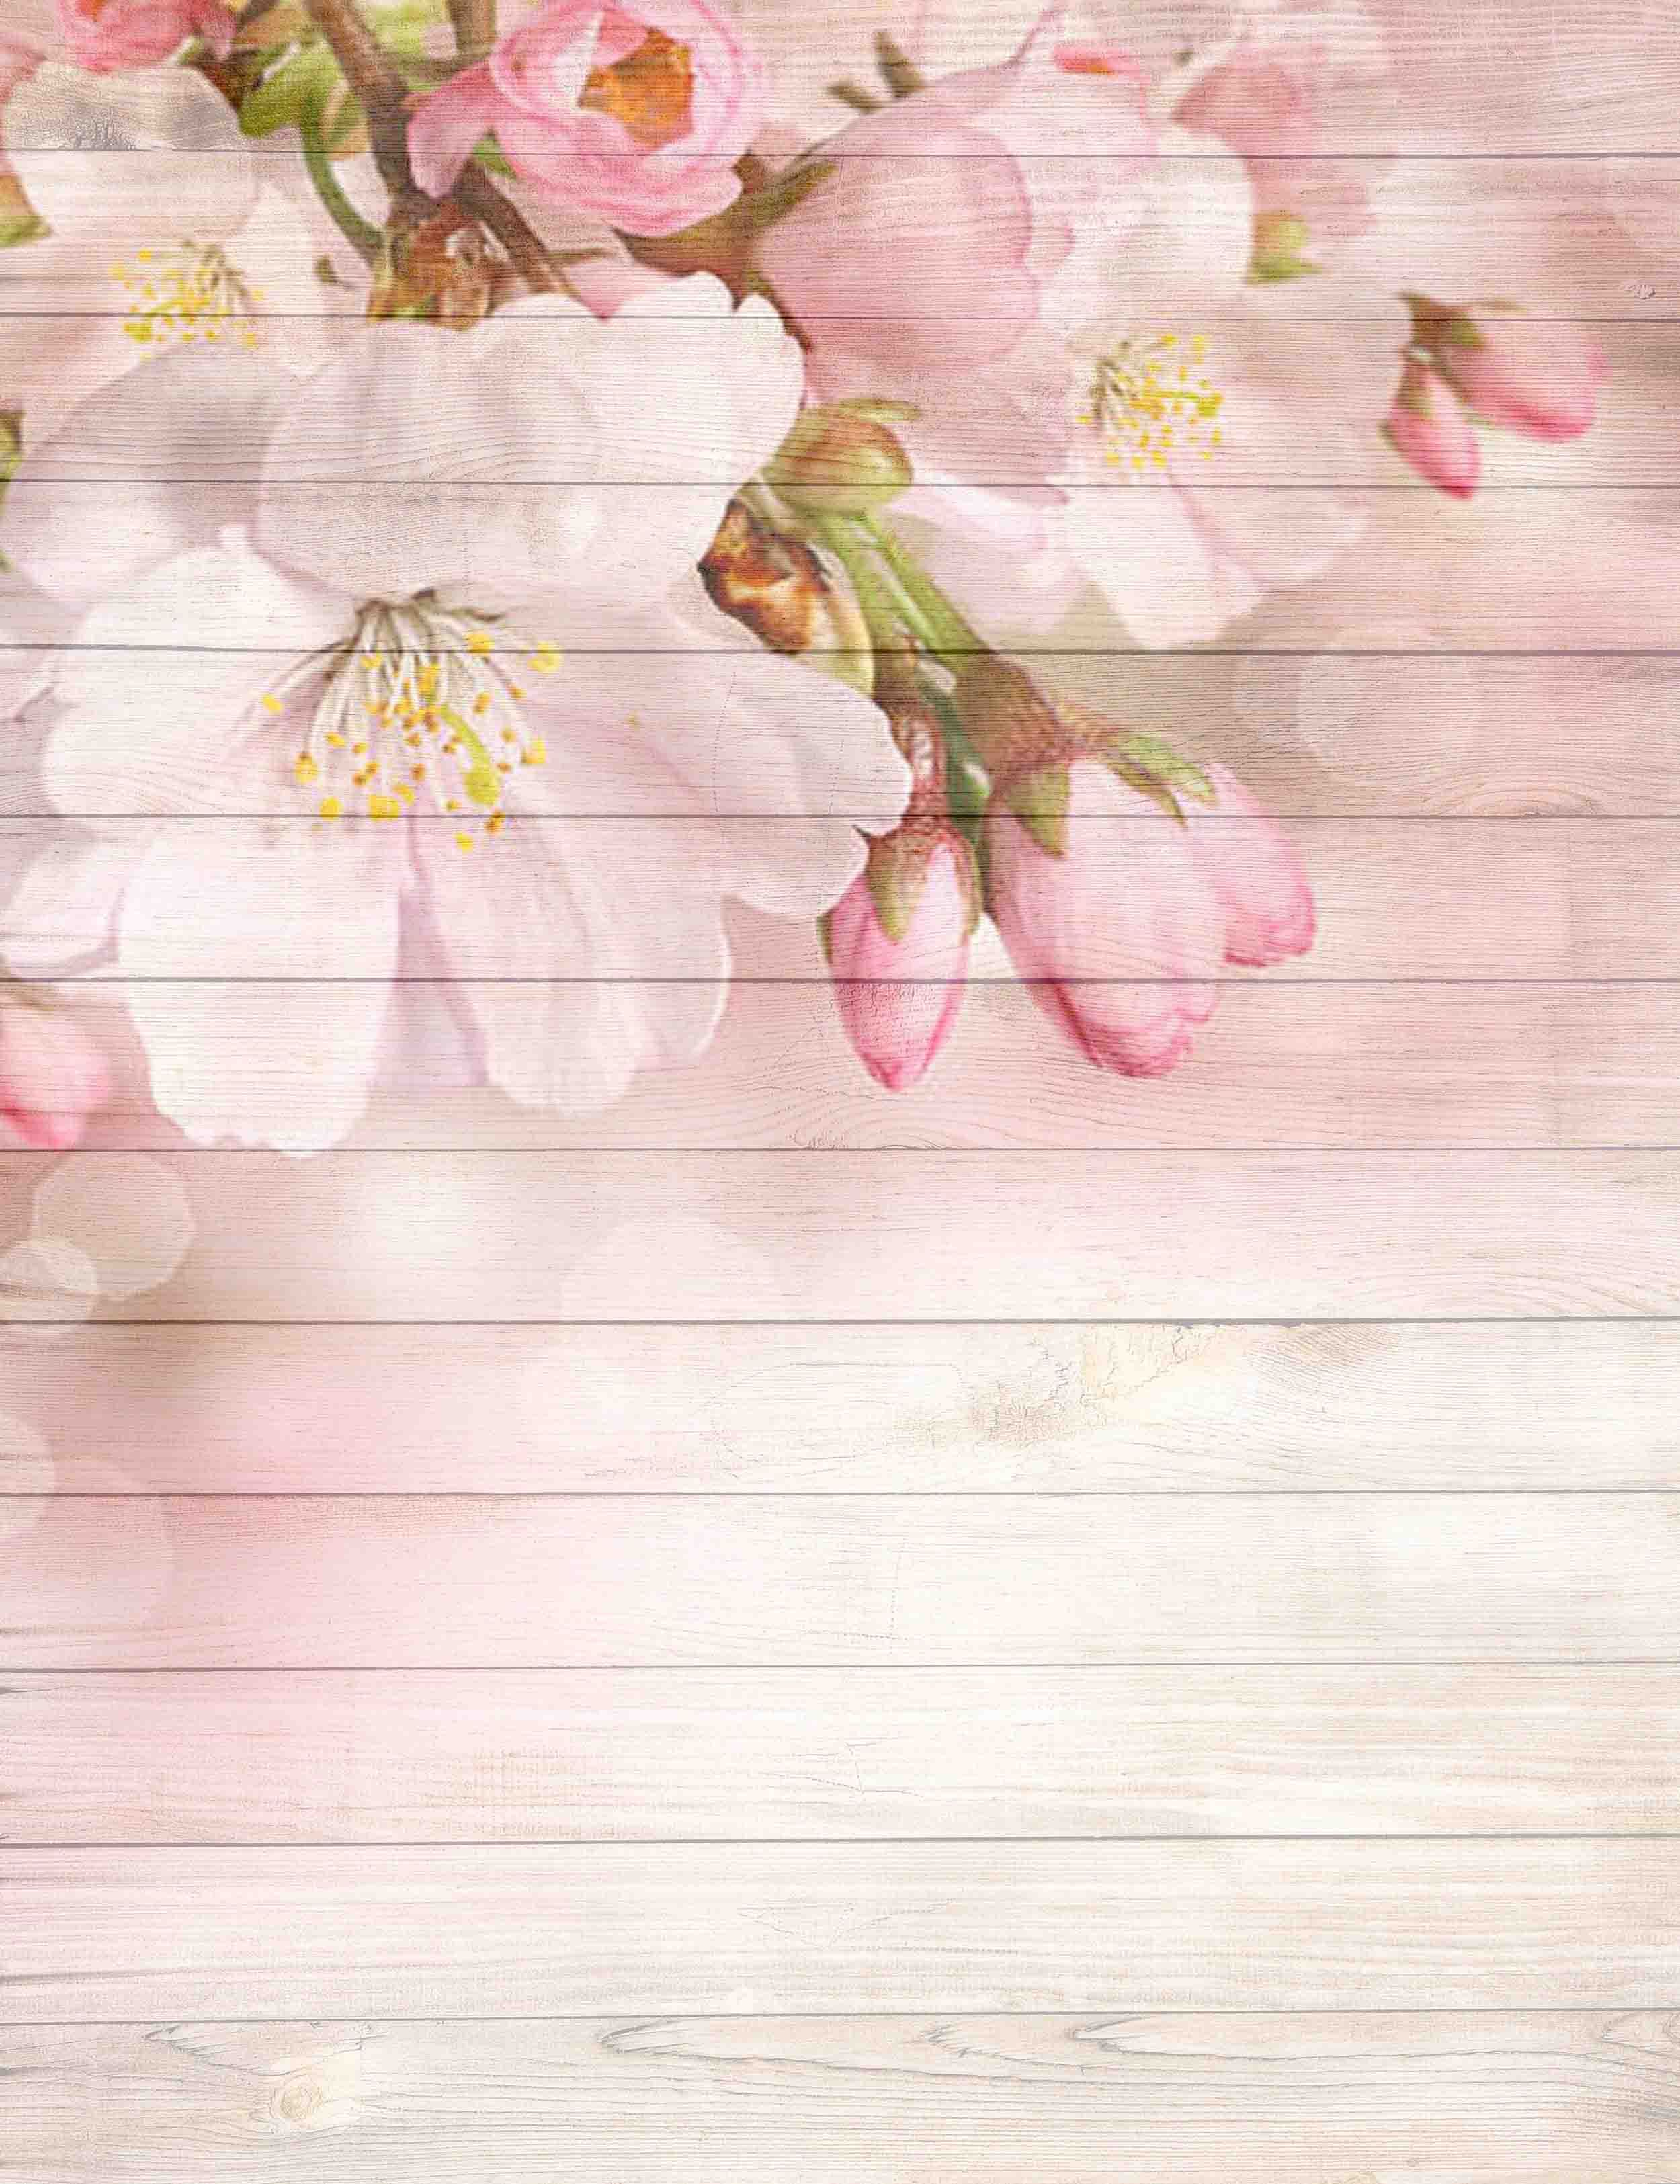 Cherry Flower Printed On Wood Floor Backdrop For Baby Photography Shopbackdrop